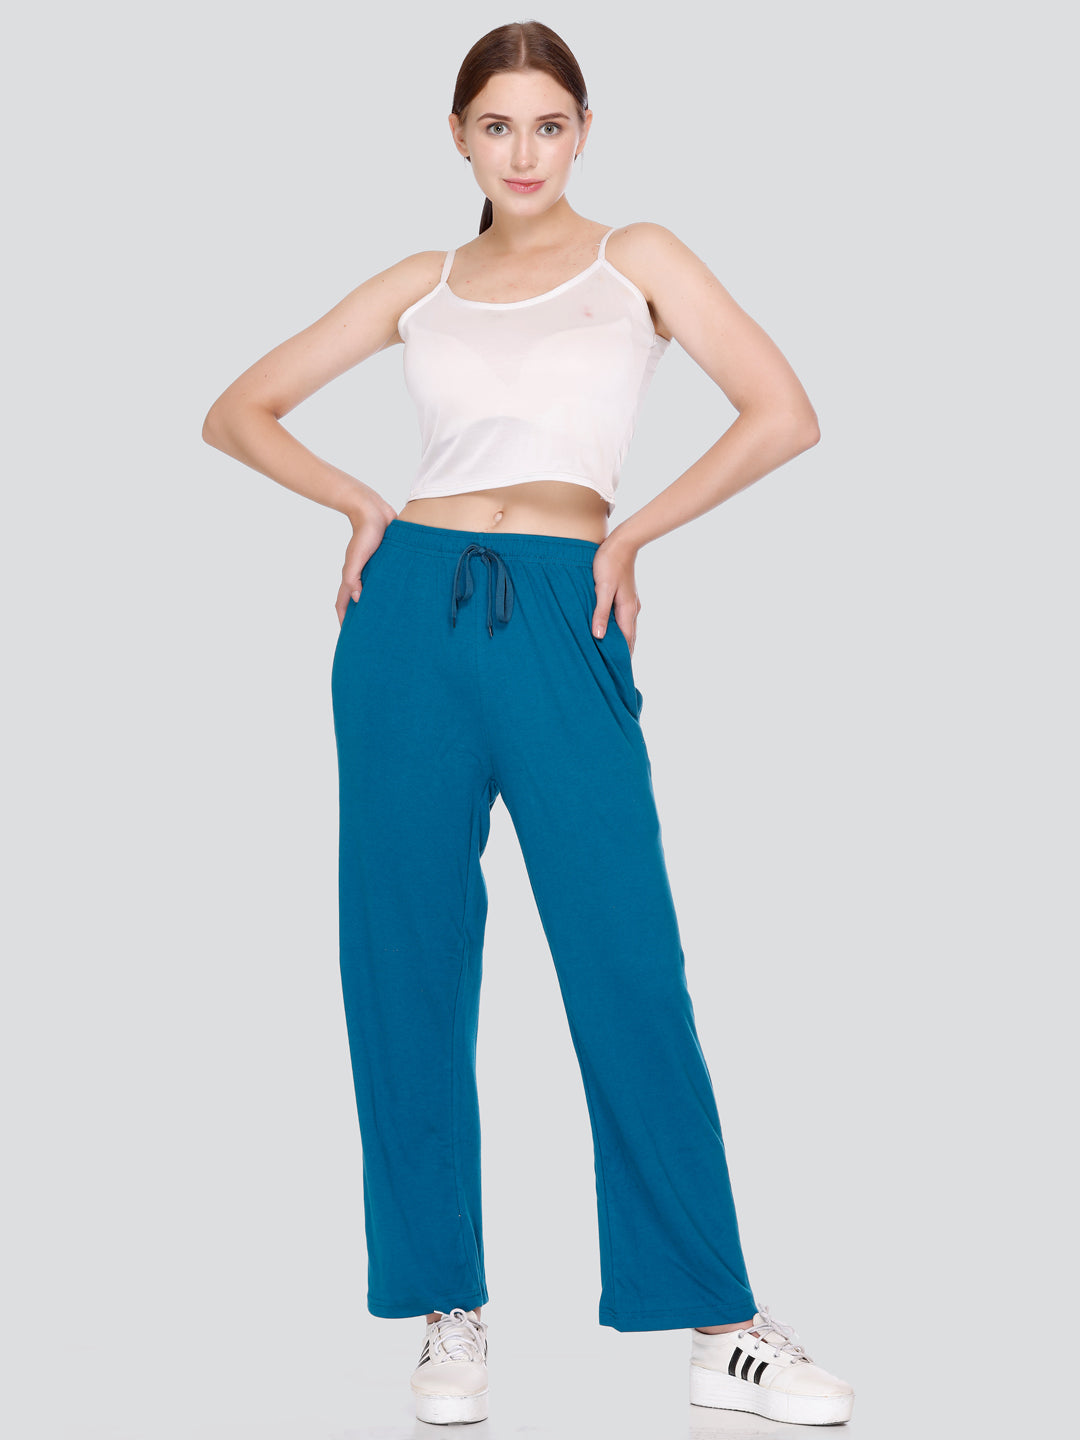 Comfortable High Waist Cotton Flared Pants For Women in Teal Blue online at best prices